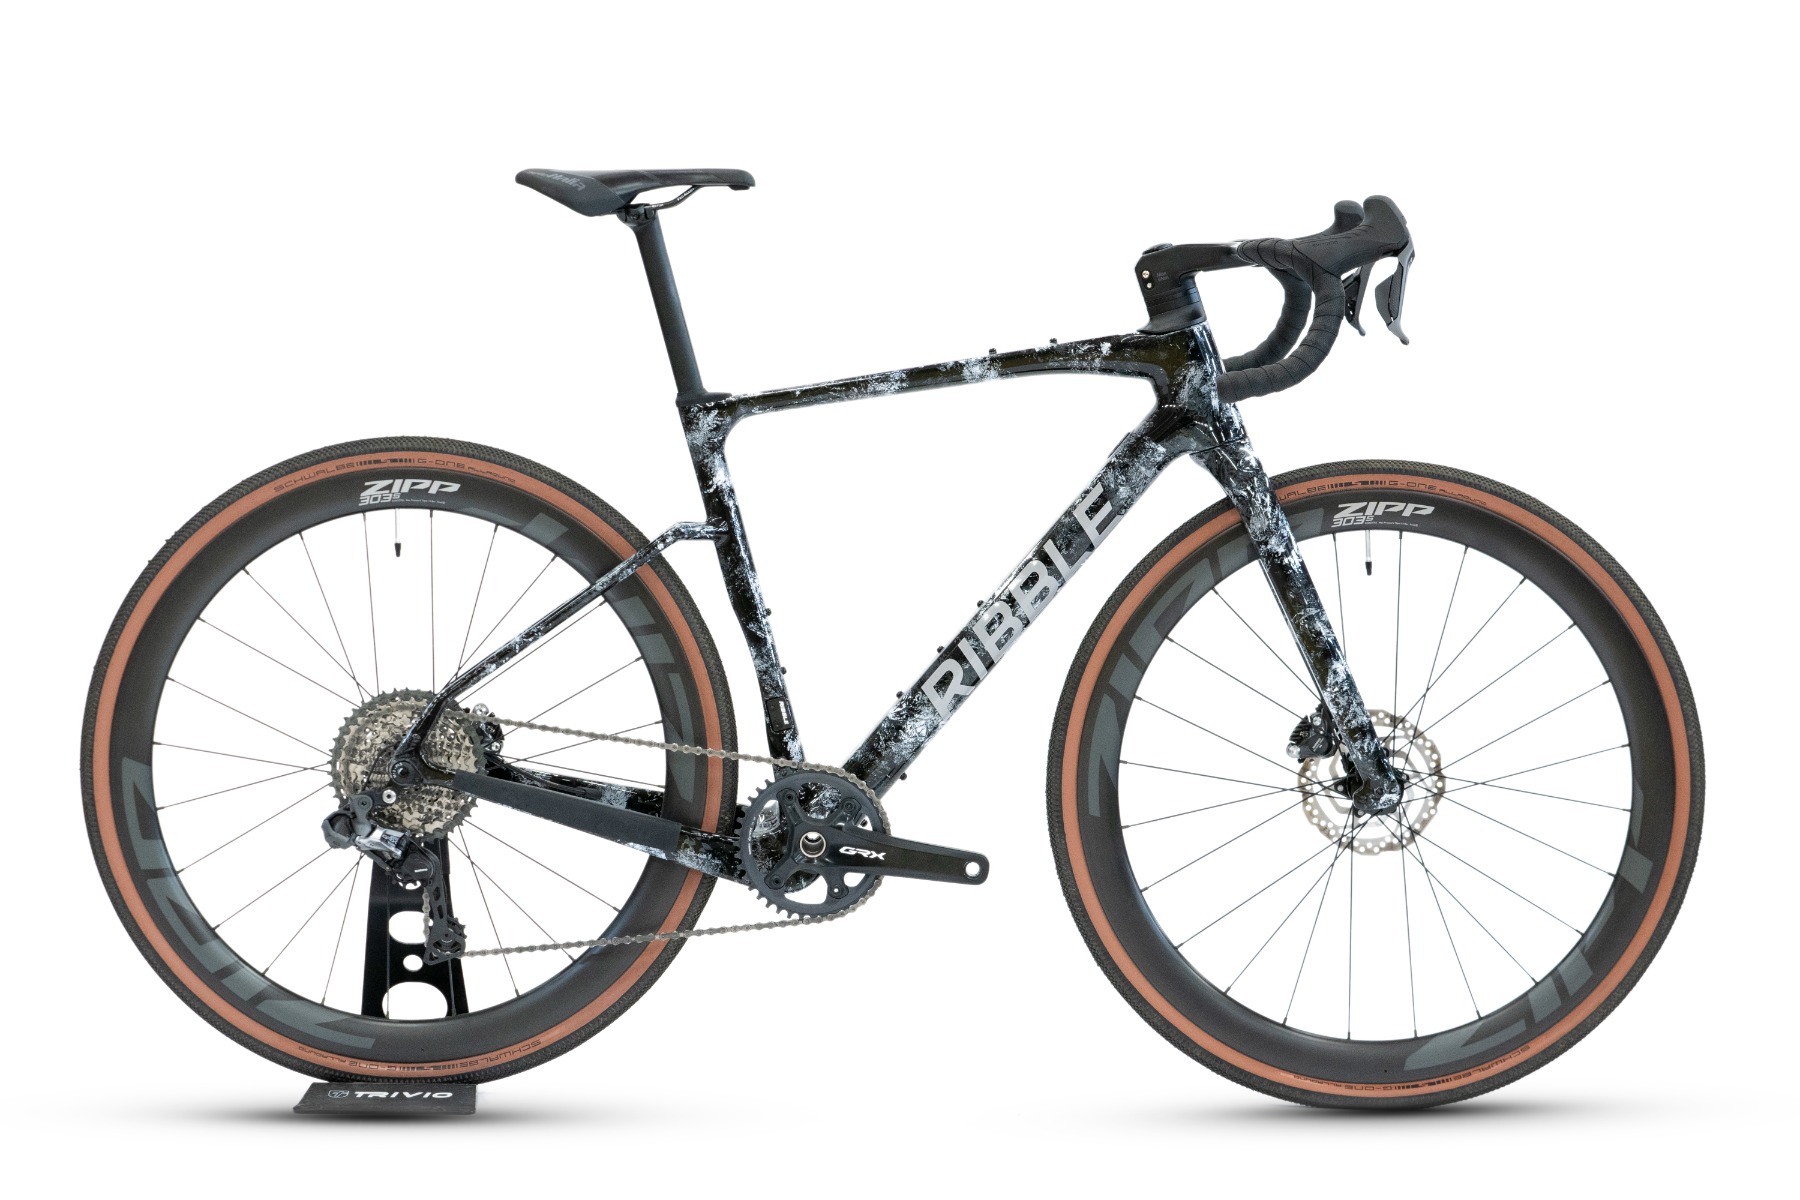 Ribble Gravel SL Stone Edition - GRX Di2 - Small from Ribble Cycles